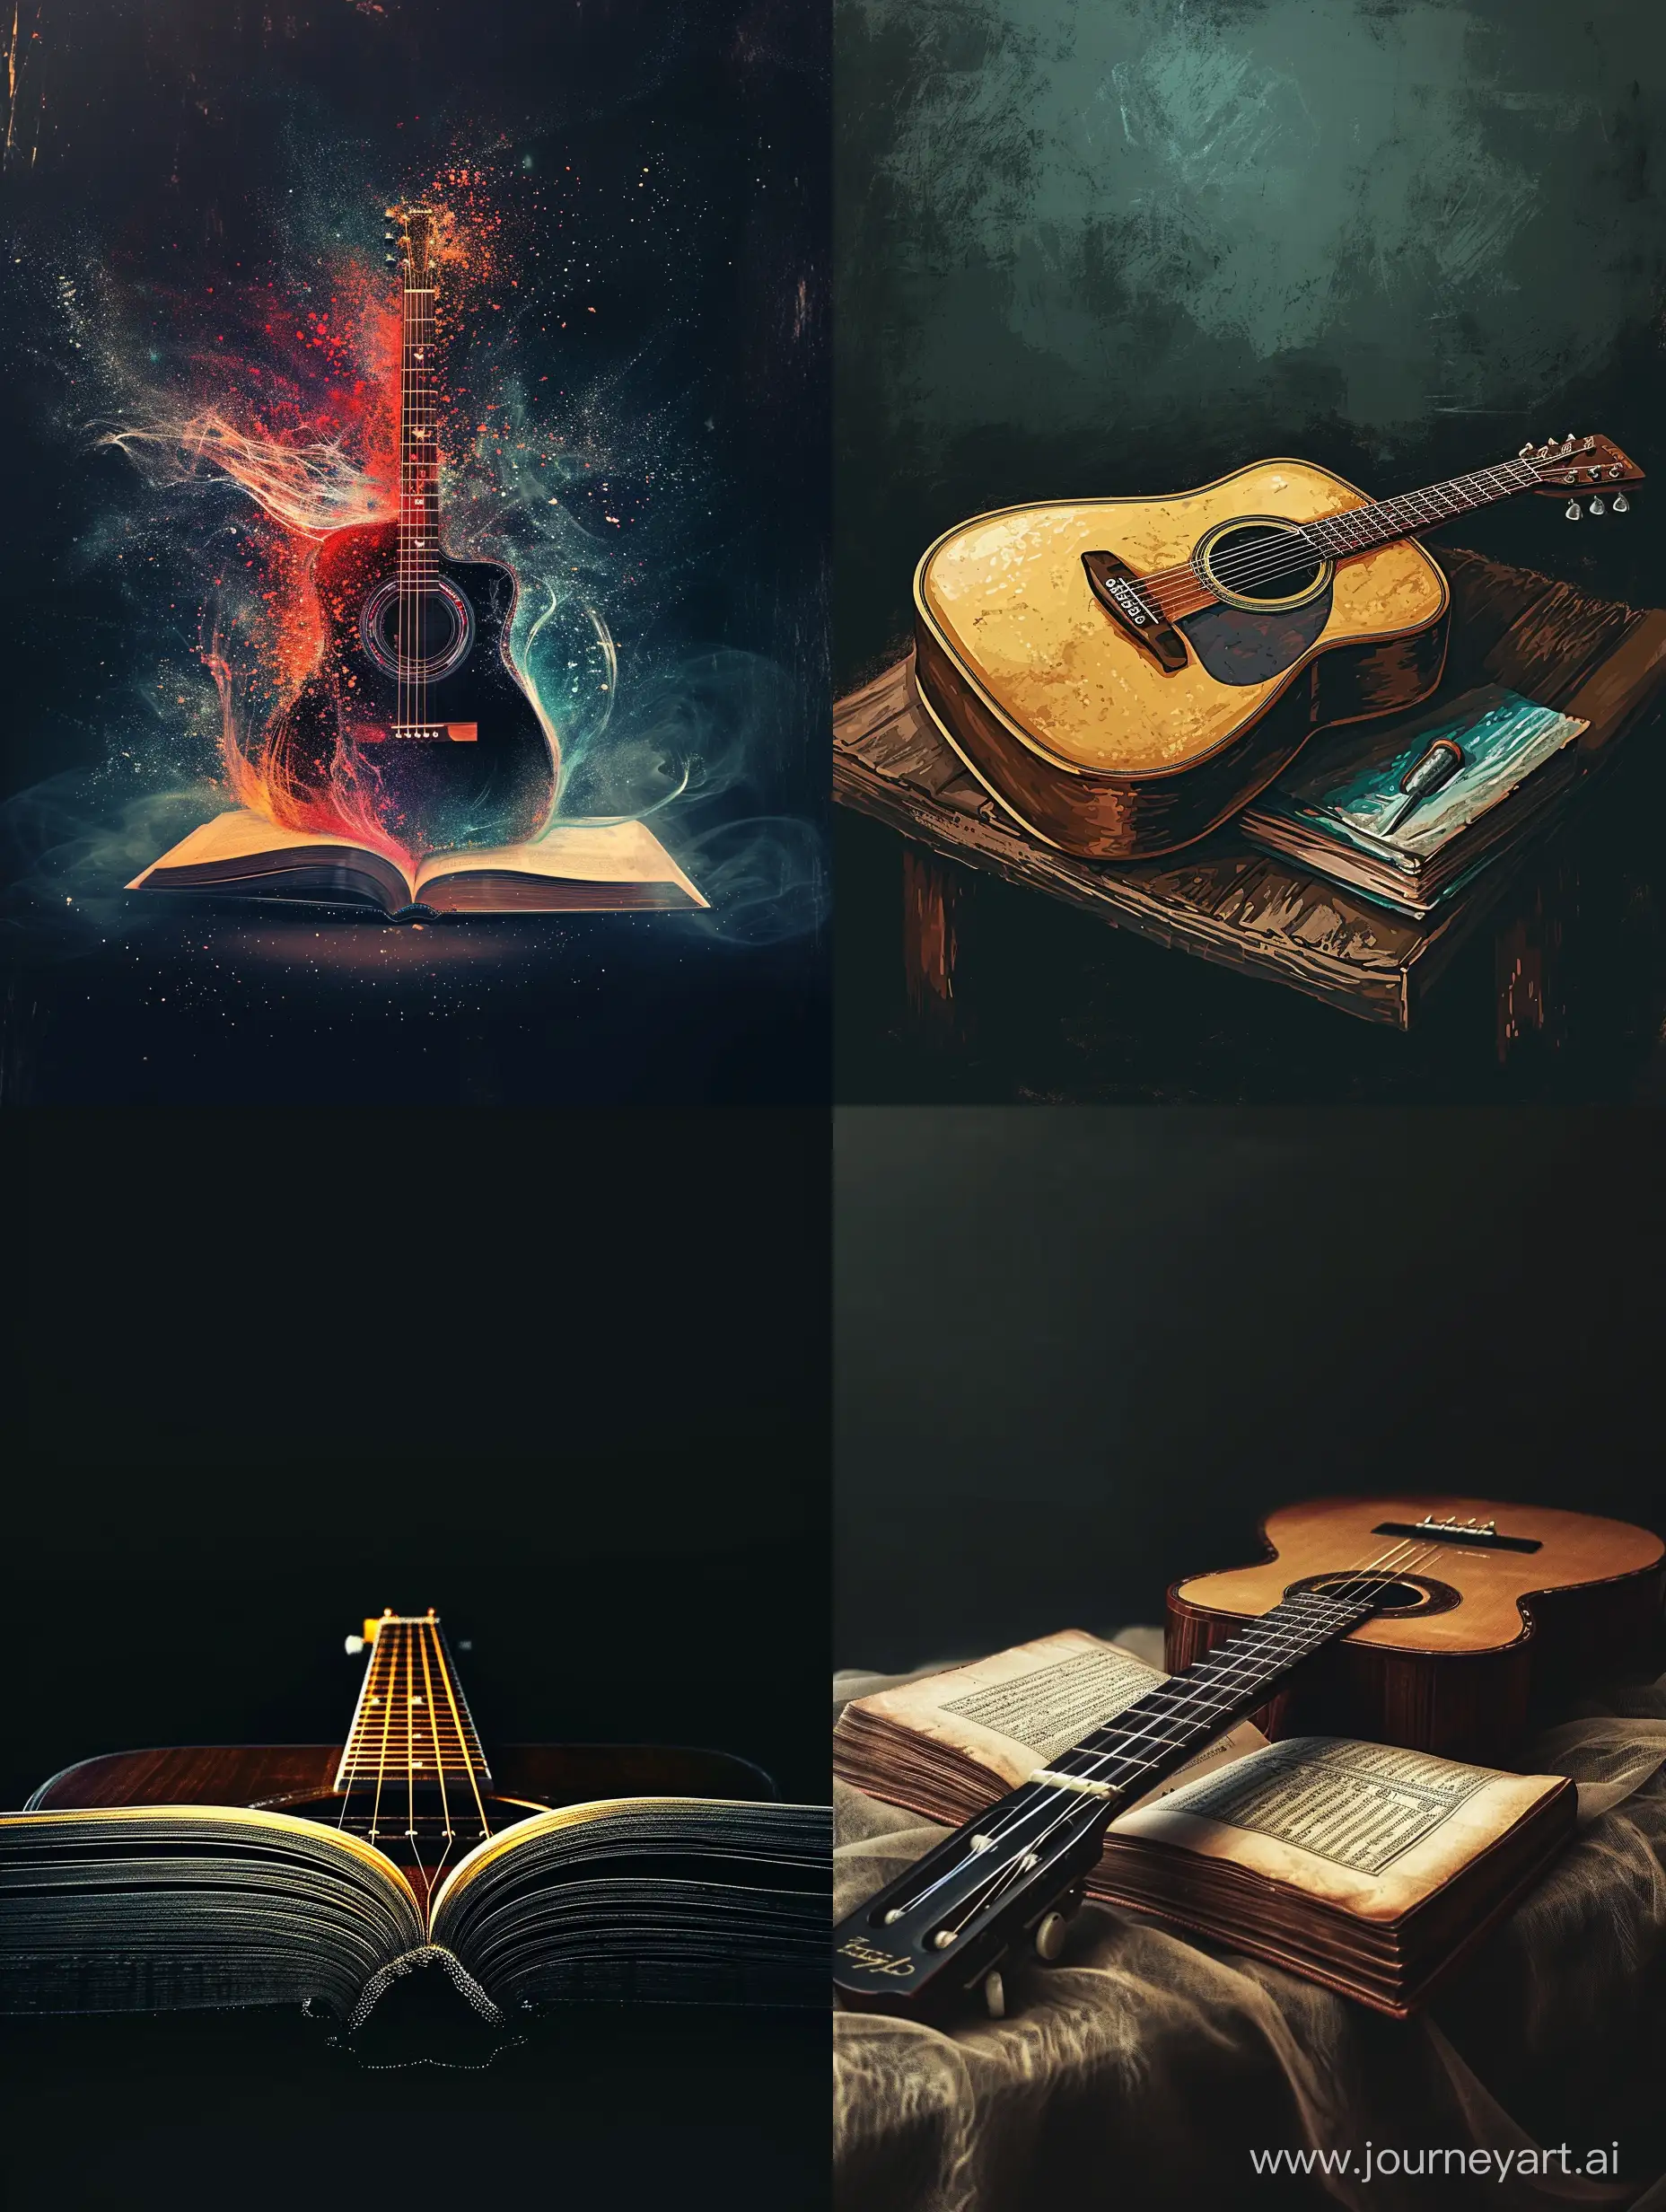 Learning tricks and secrets of acoustic guitar, scientific cover book style, dark colors